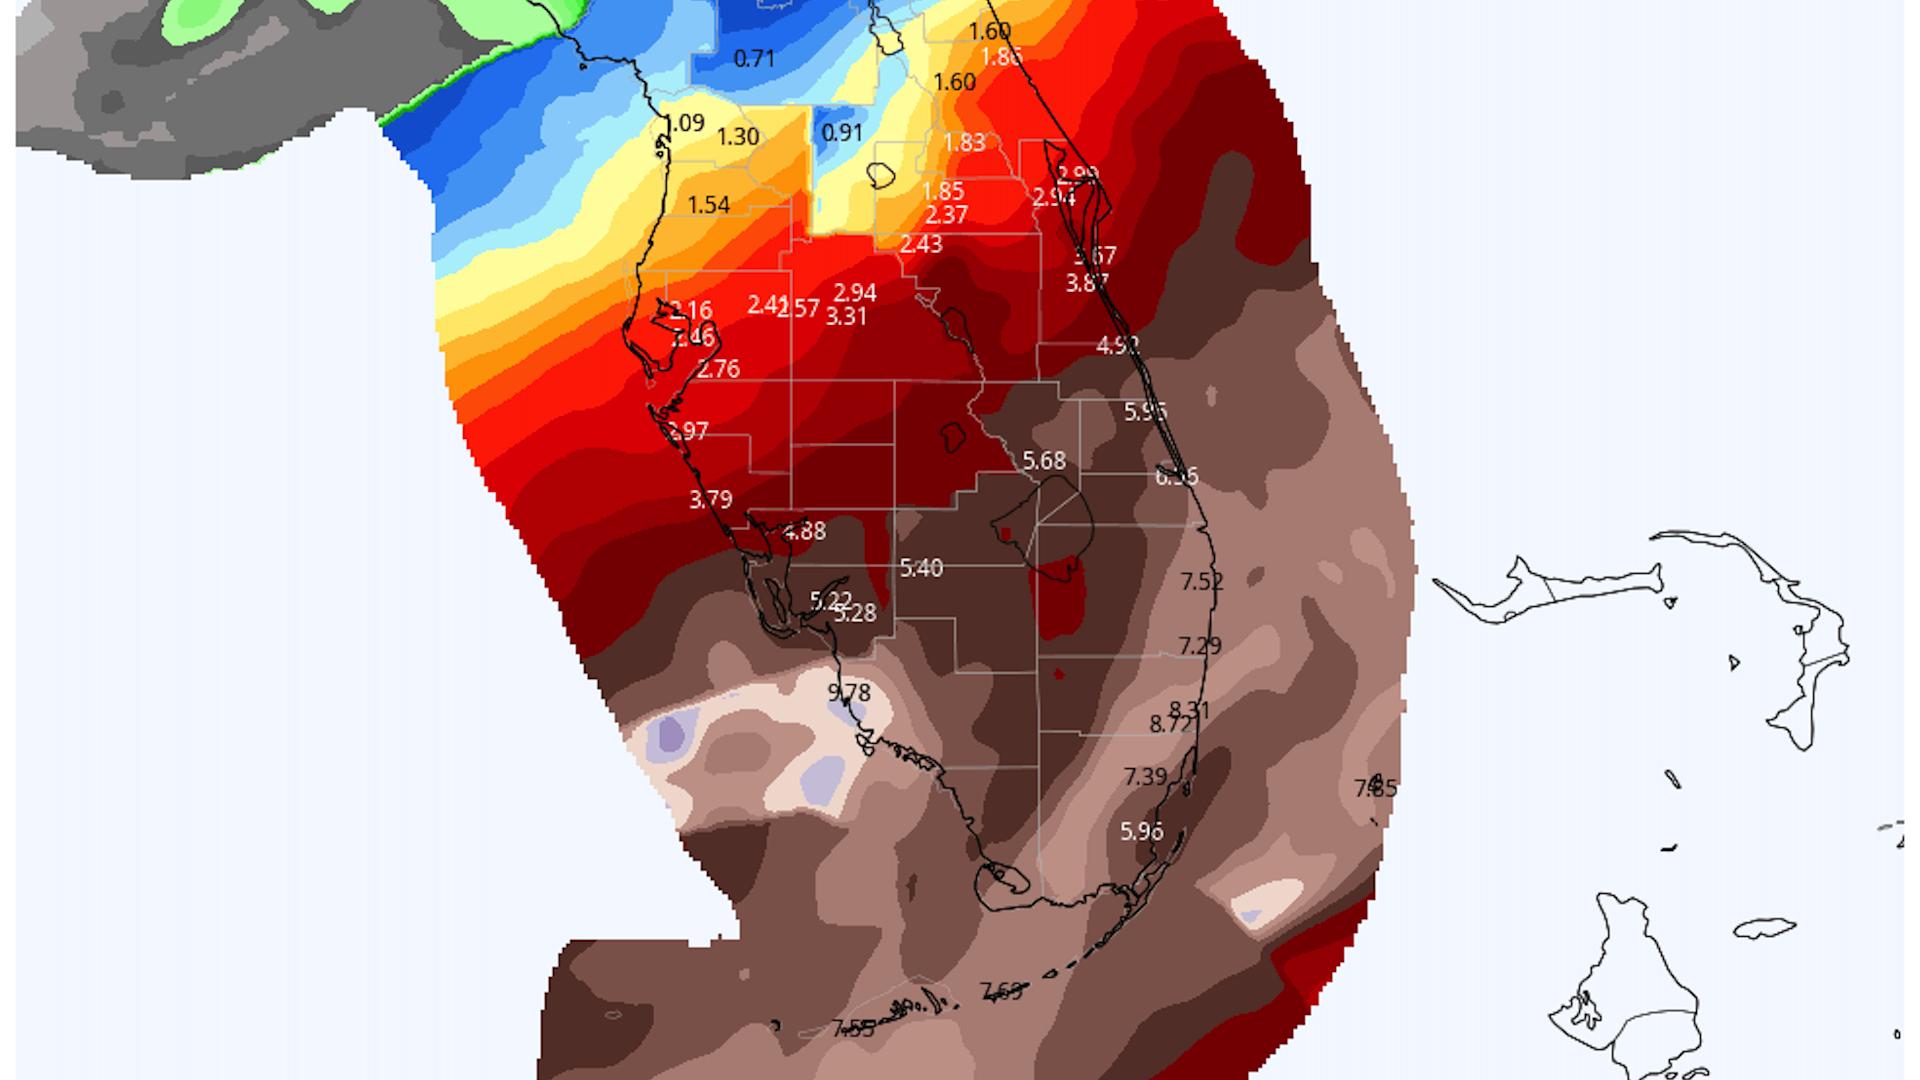 Map showing forecast rainfall totals for Florida from likely T.S. Alex.